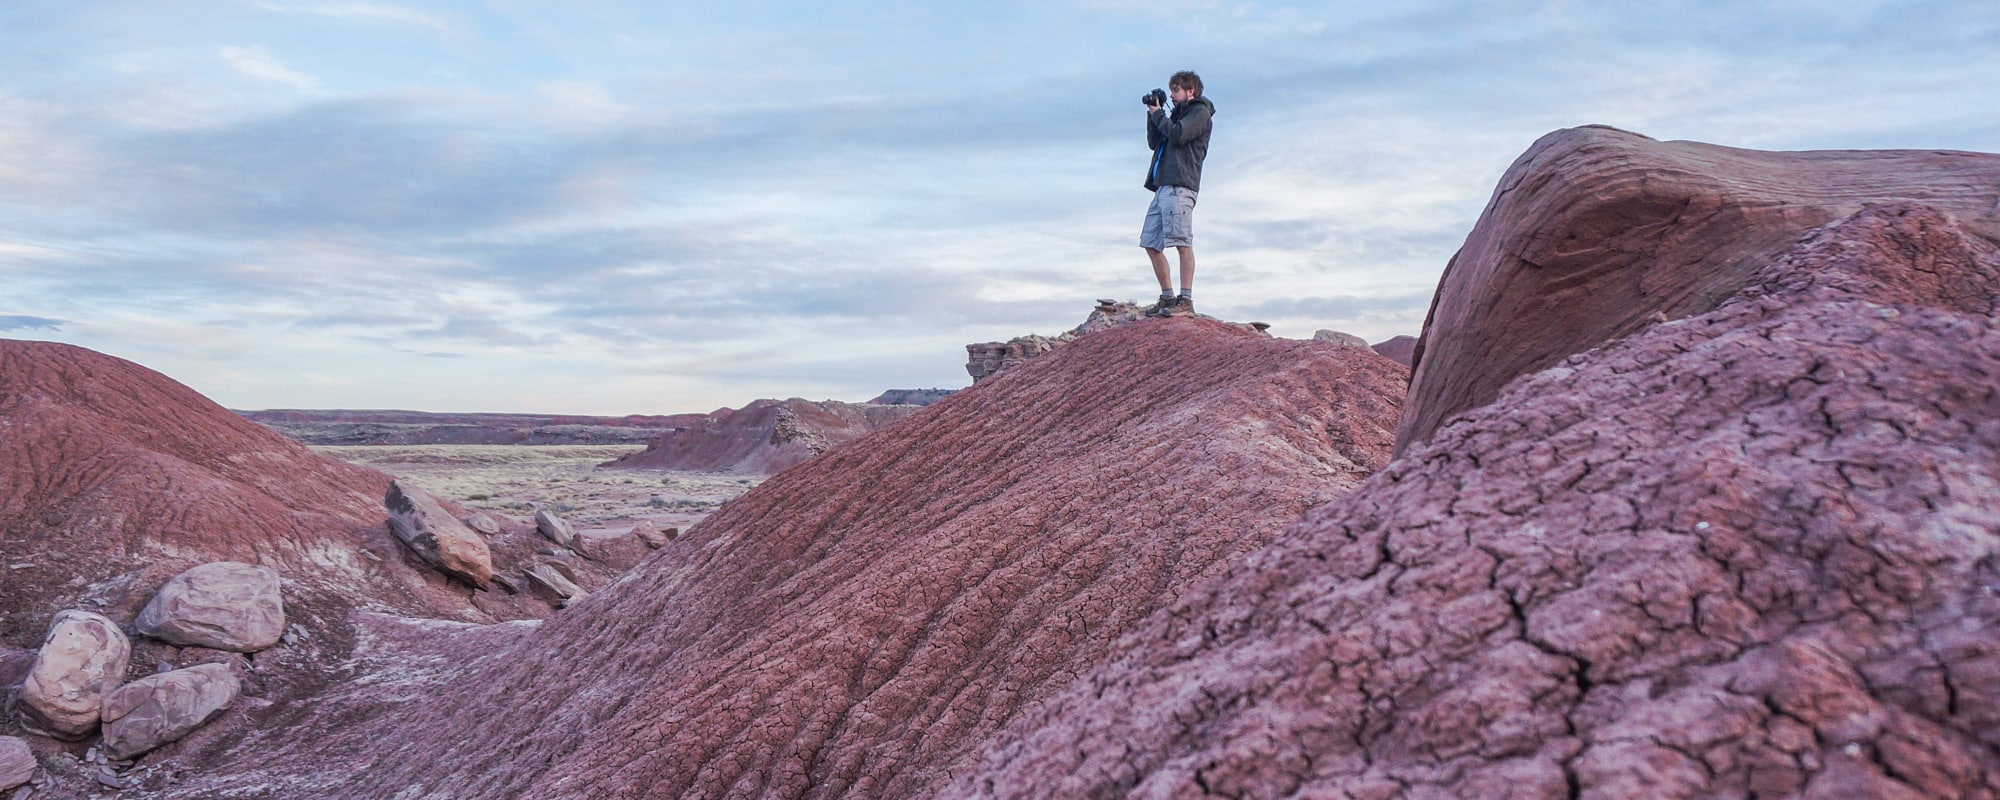 Petrified Forest National Park - Banner Photography